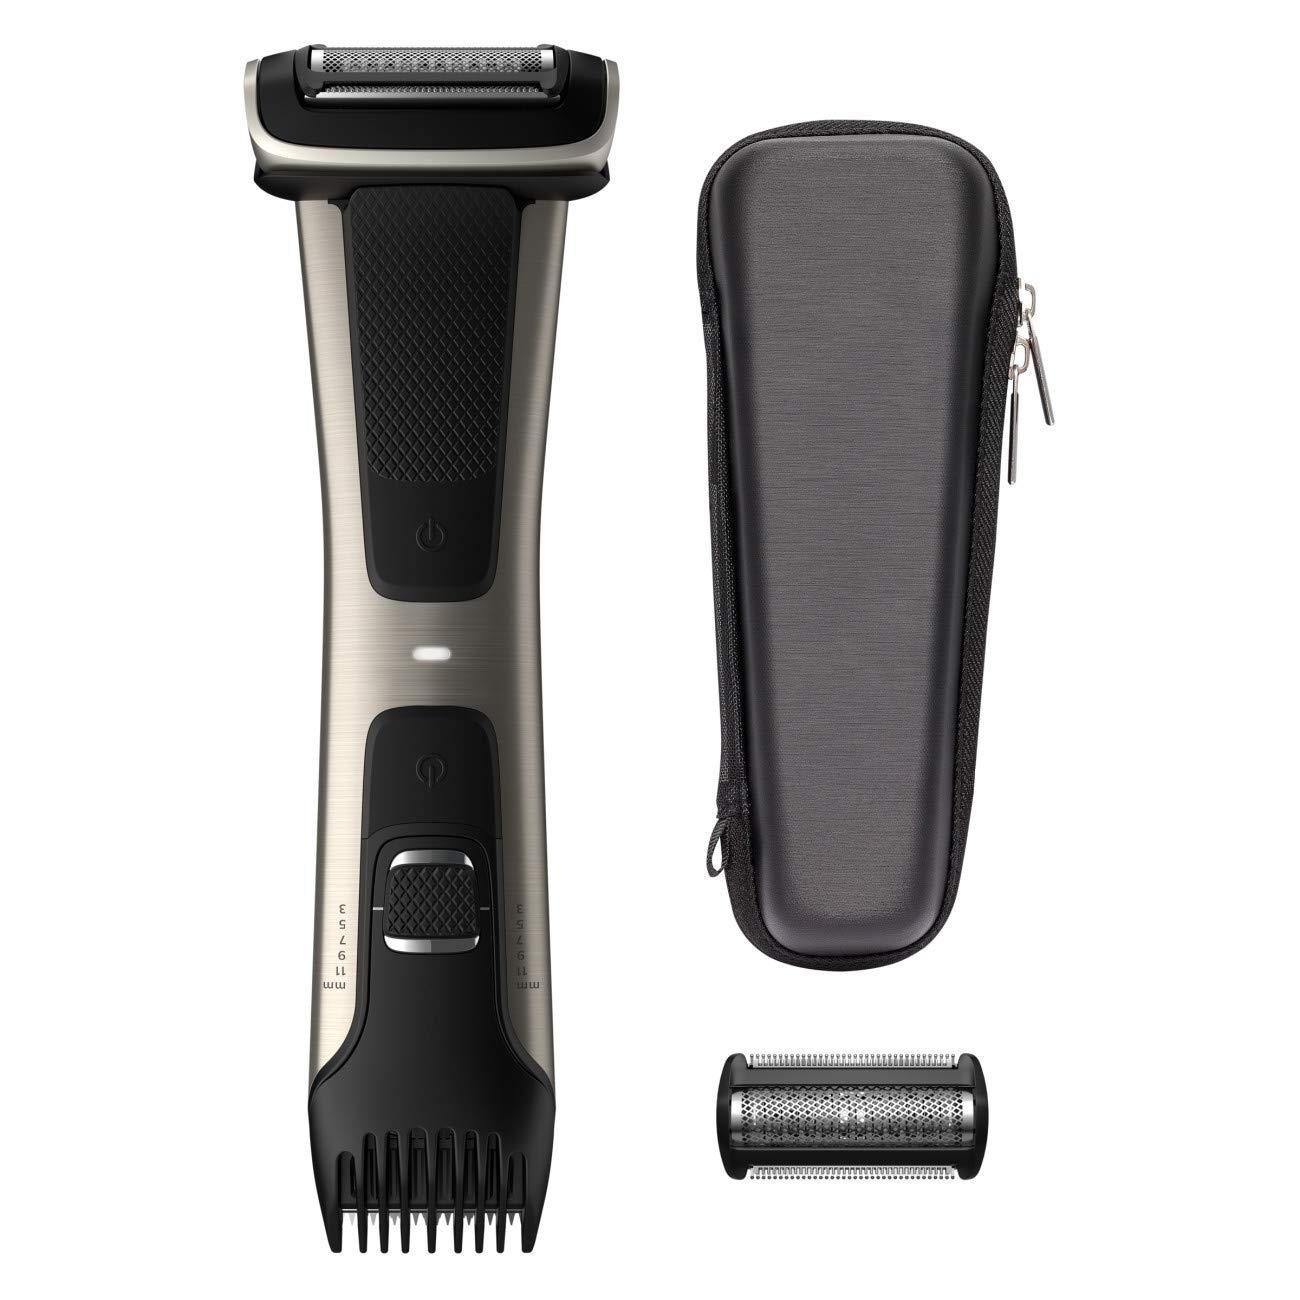 Philips Norelco Series 7000 Bodygroom Trimmer Shaver for $48.99 Shipped